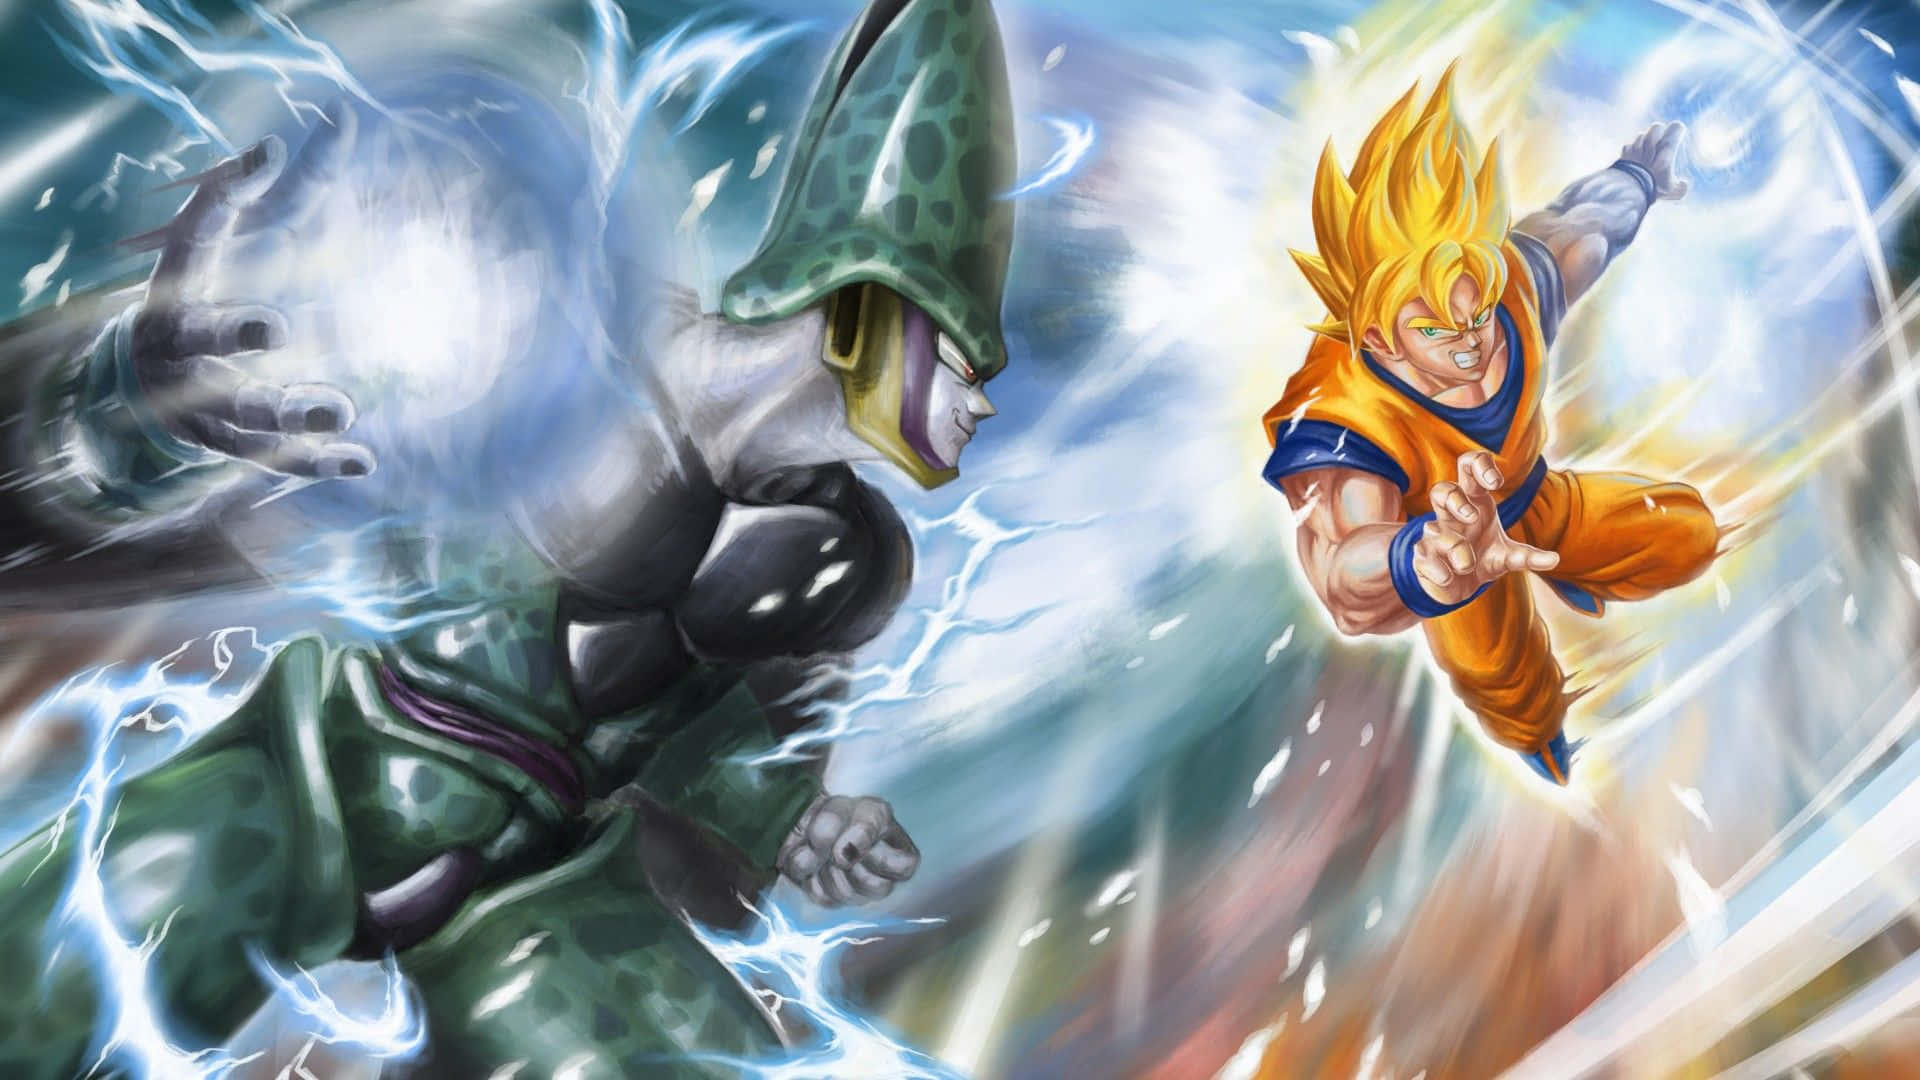 The Saiyan heroes of Dragon Ball Super in an epic battle